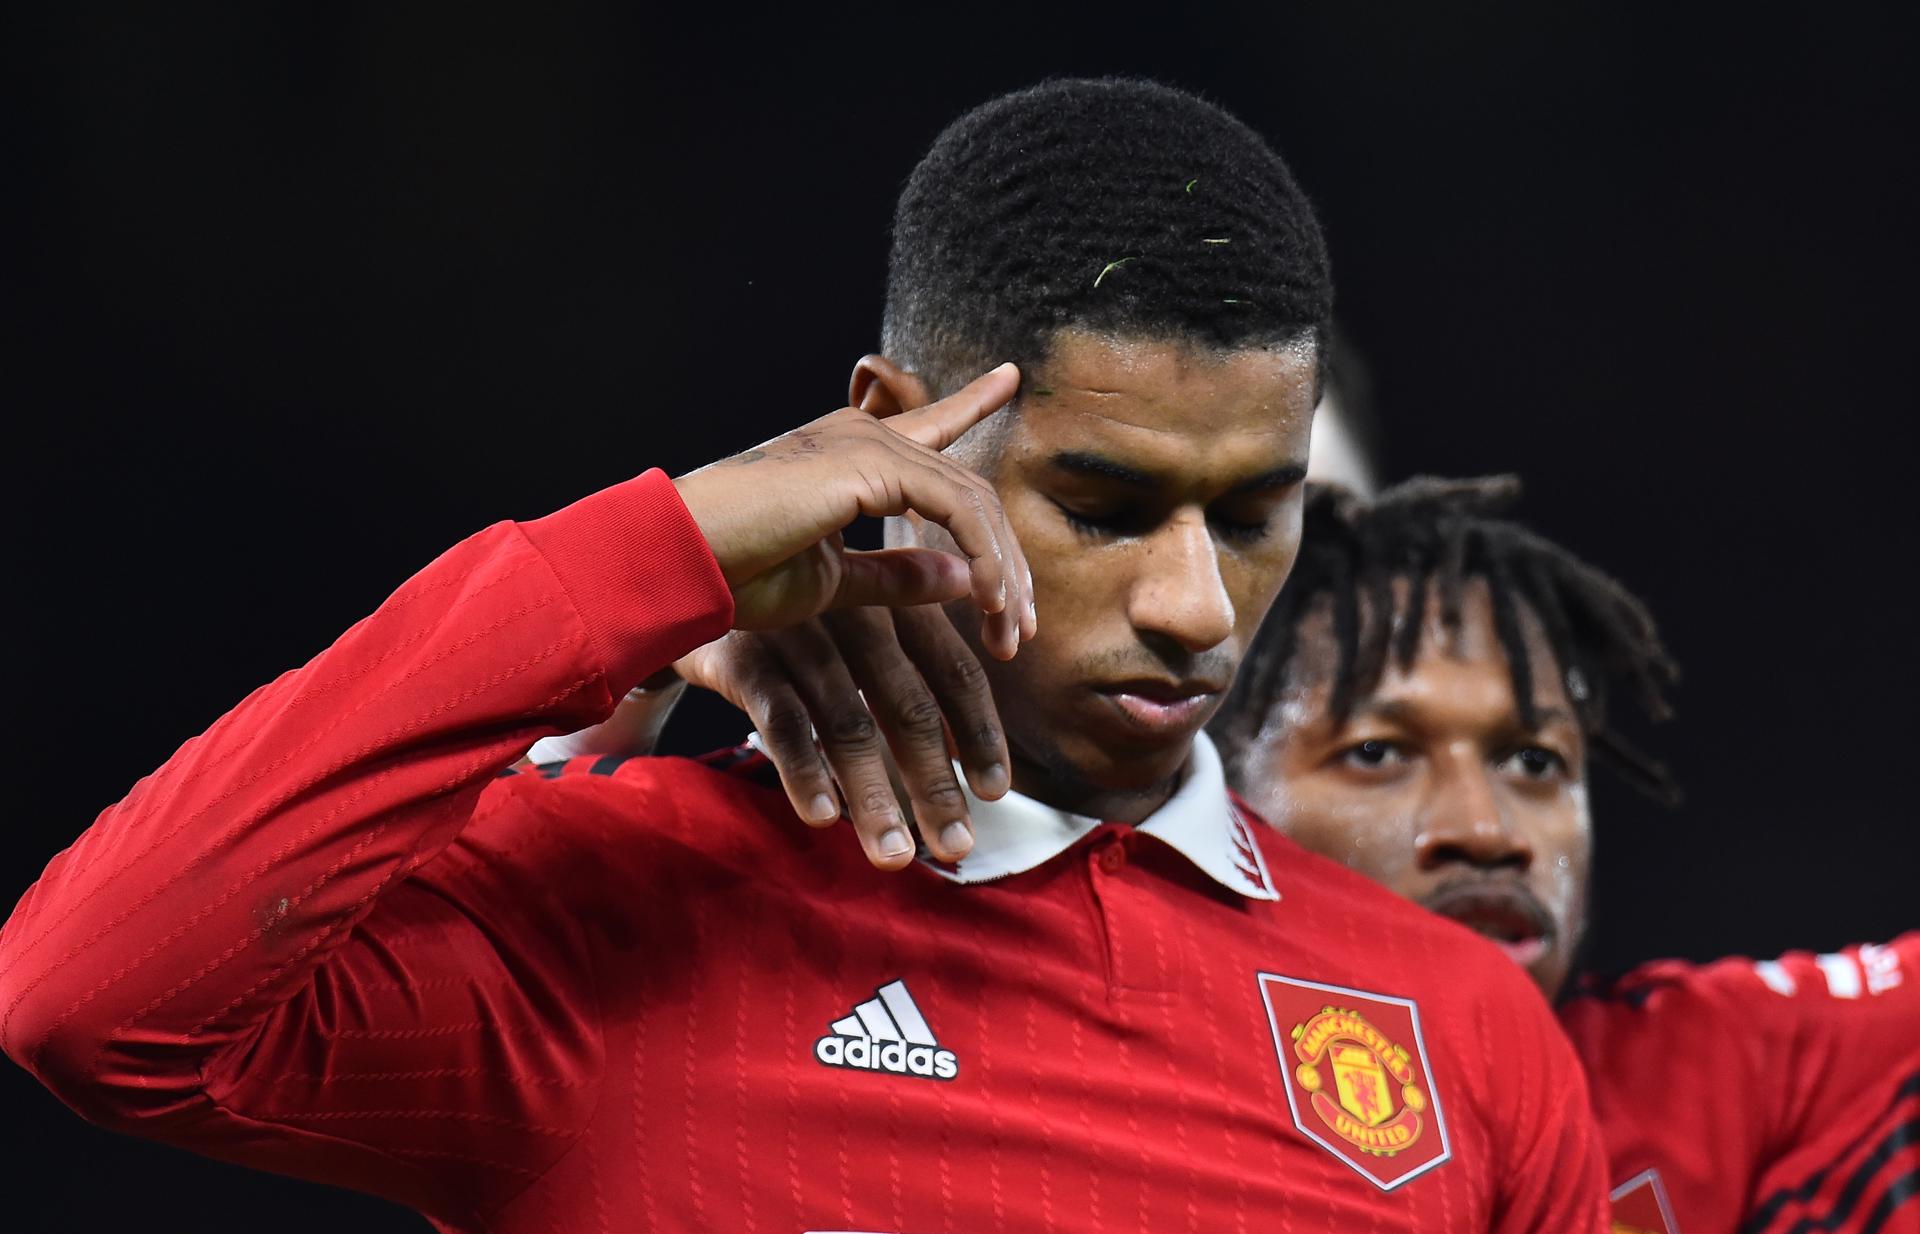 "Marcus Rashford's Impact at Manchester United A Look at His Numbers